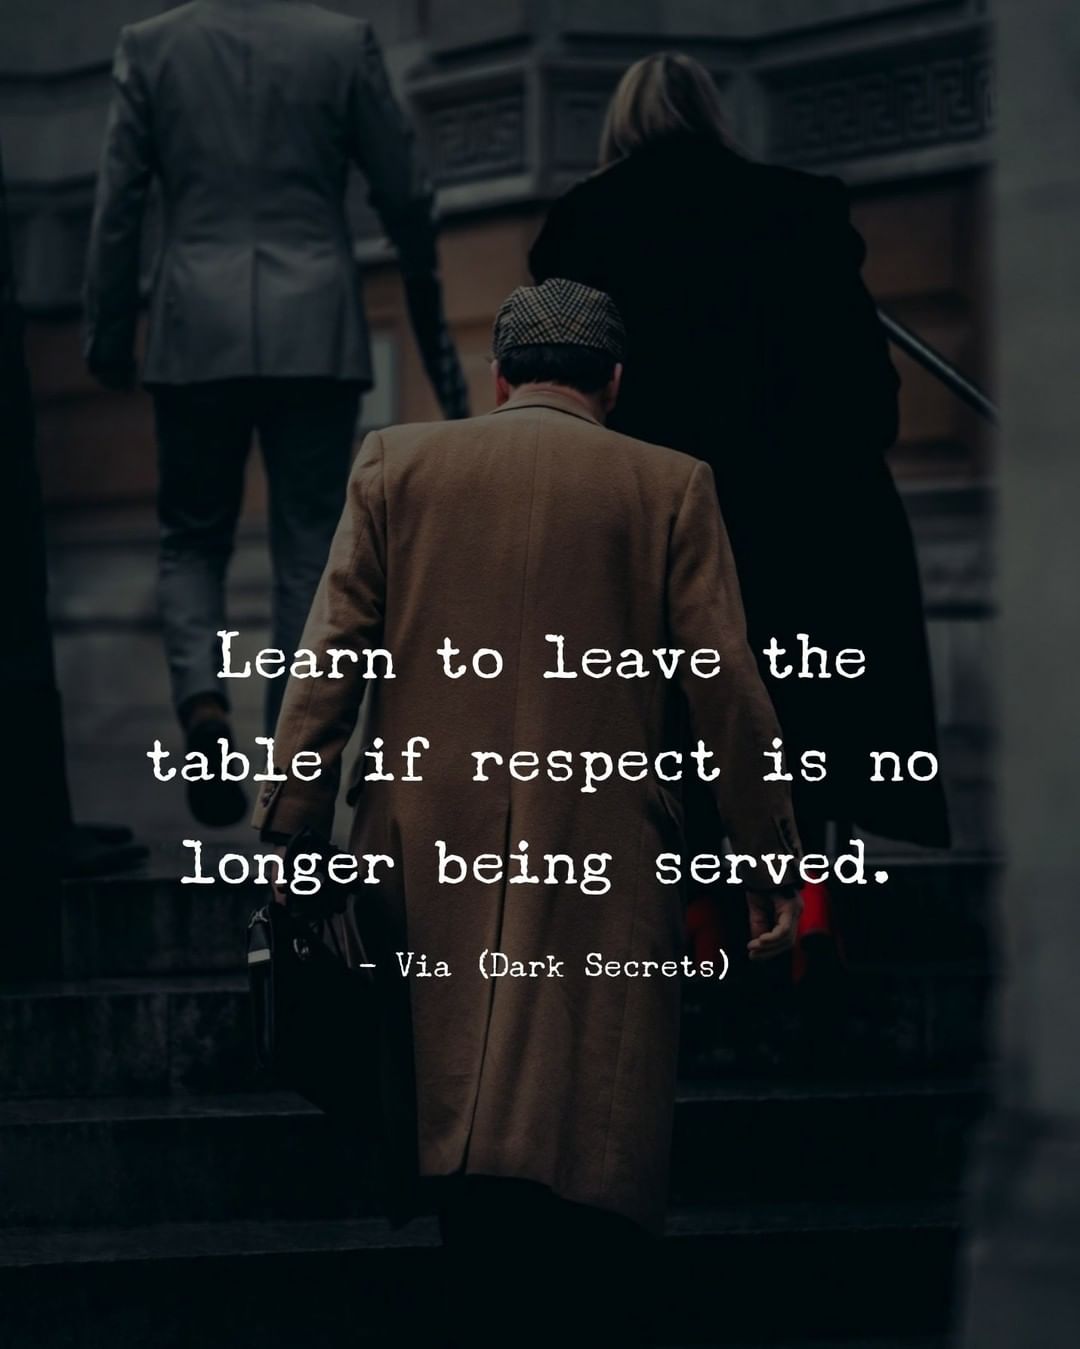 Learn to leave the table if respect is no longer being served.